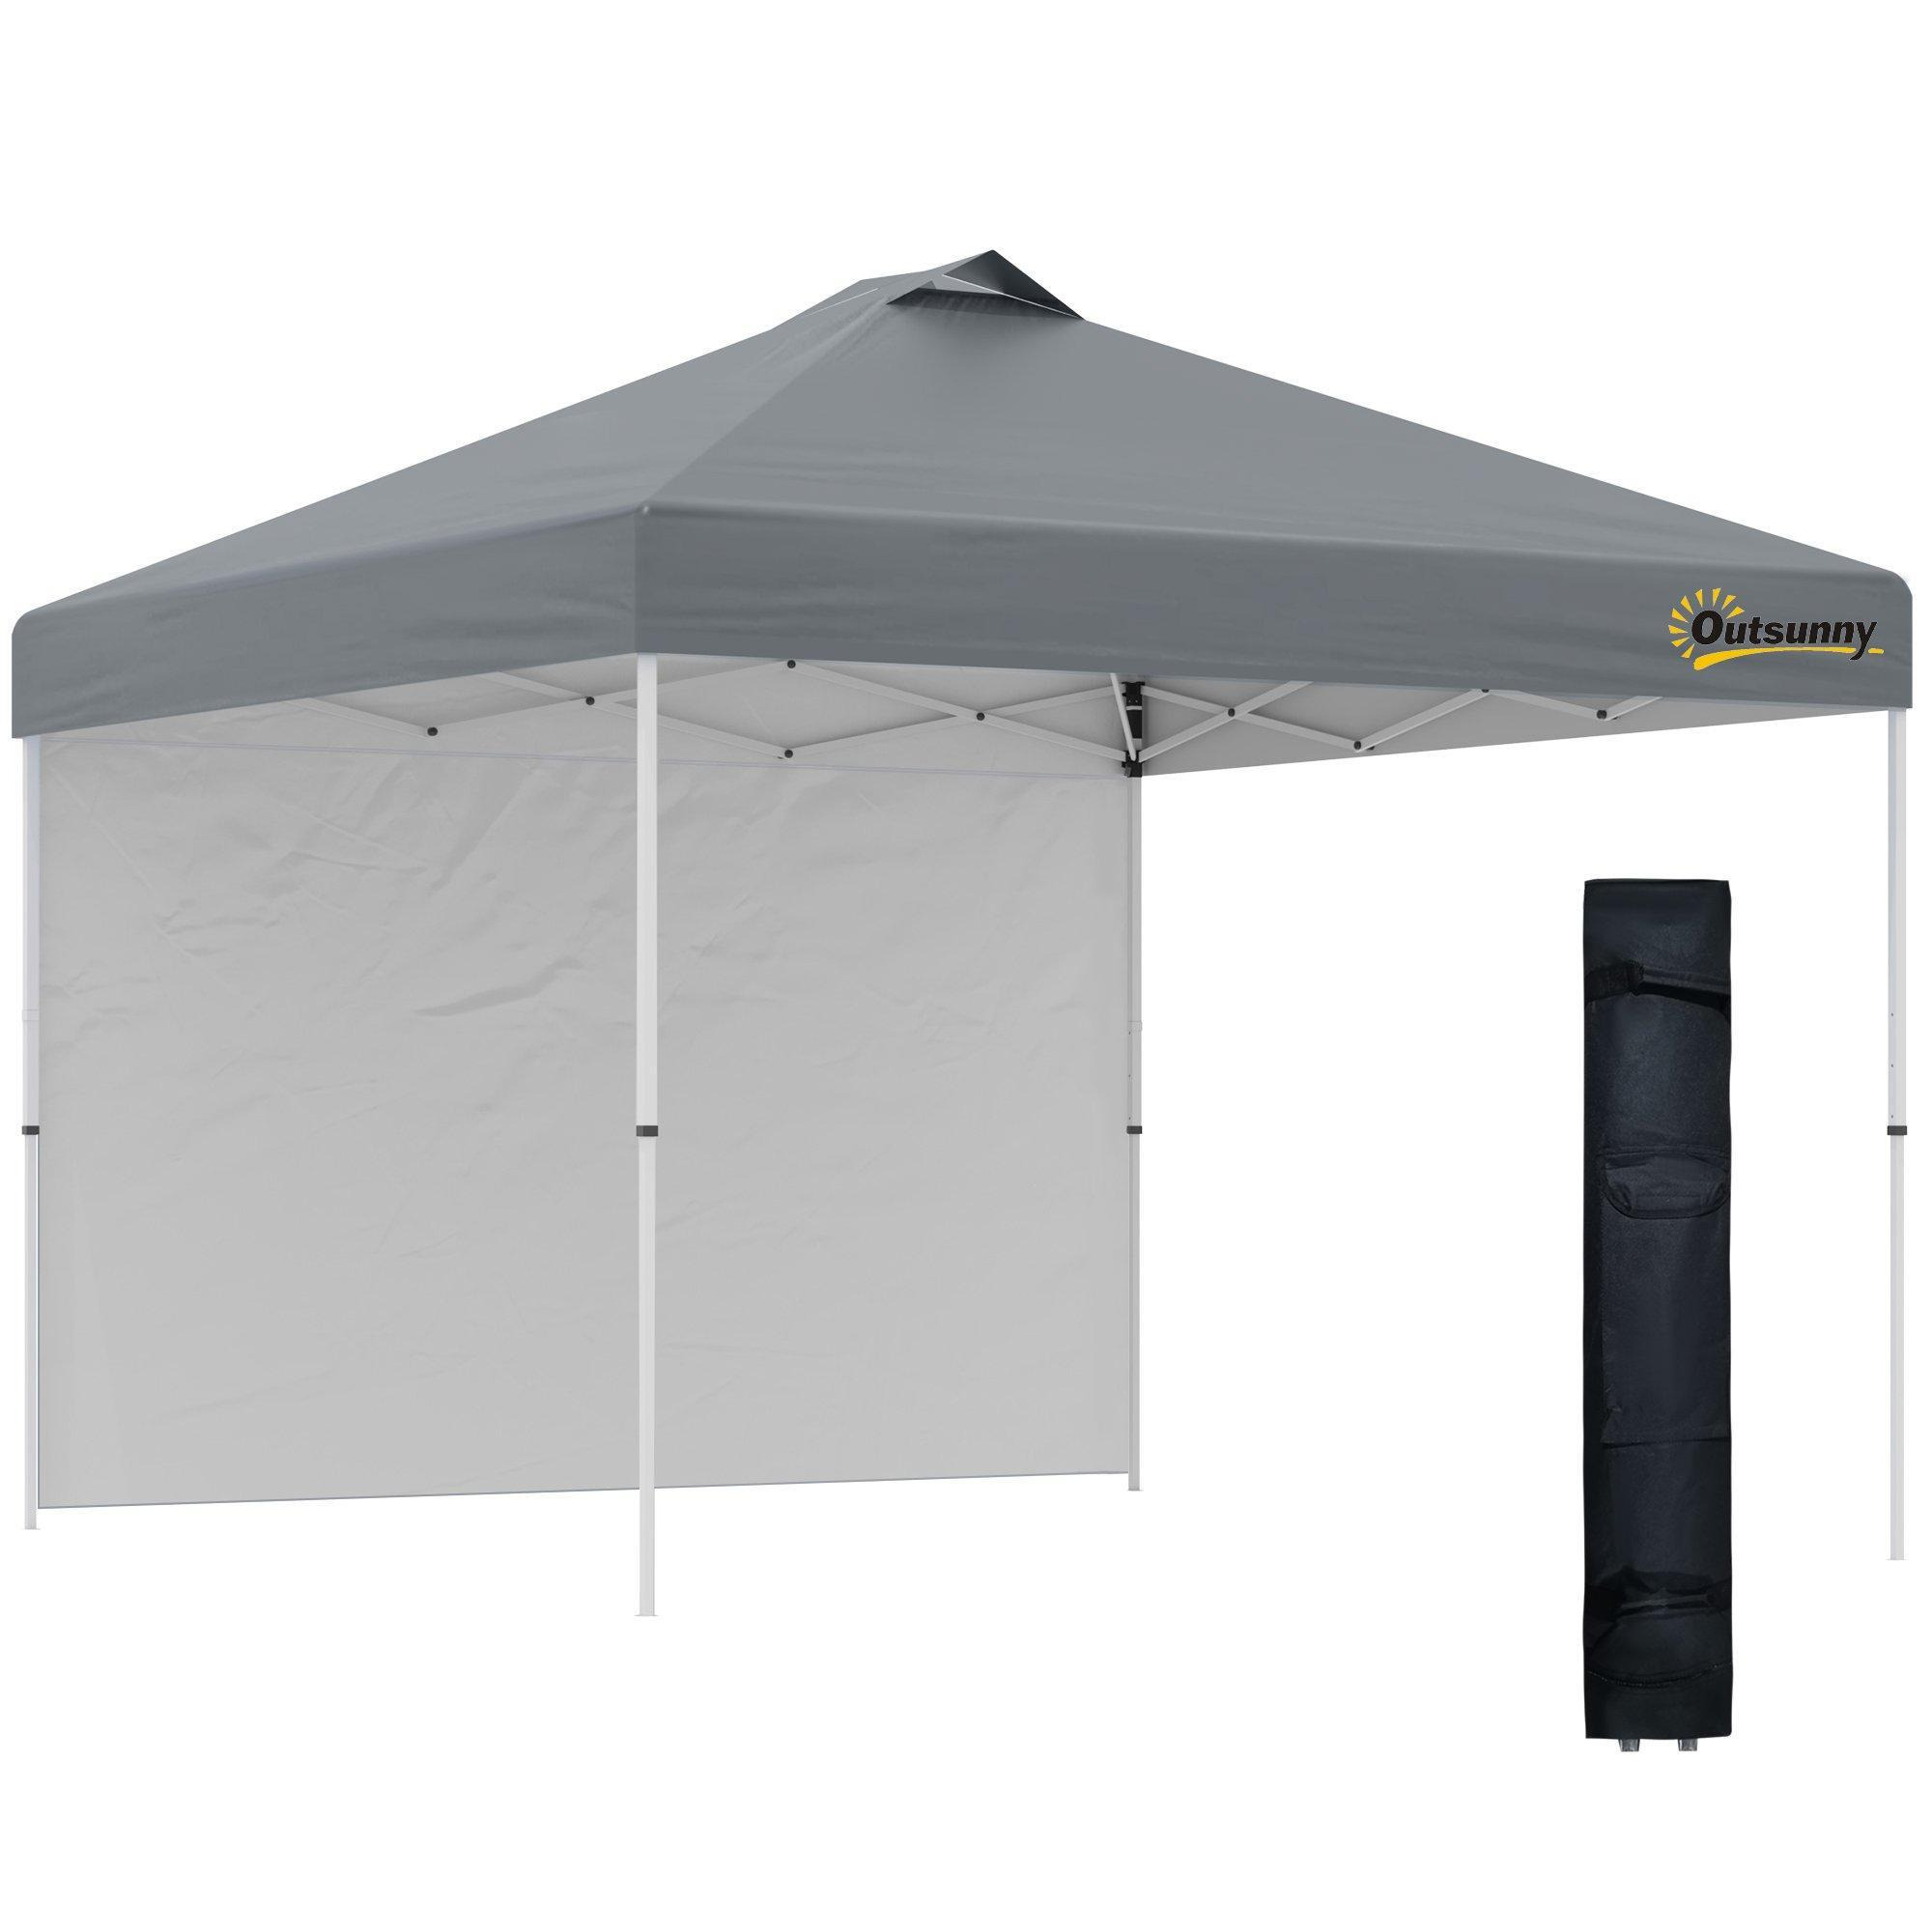 3x3Metre Pop Up Gazebo Canopy Tent with 1 Sidewall Carrying Bag - image 1